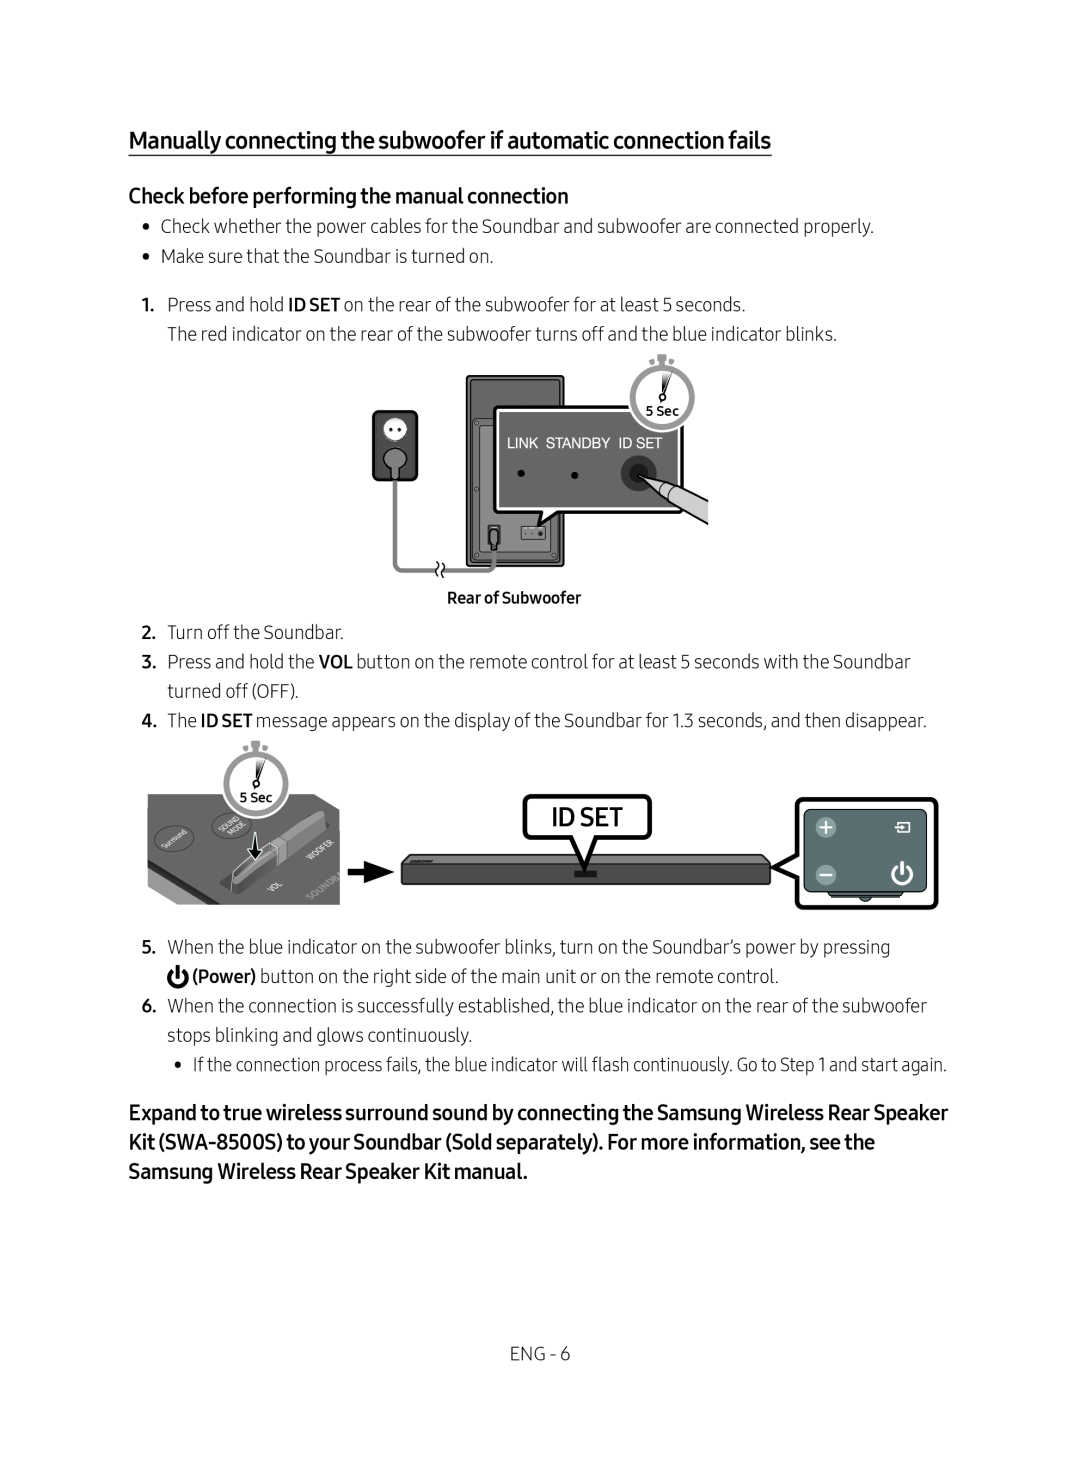 Samsung HW-M450/ZG, HW-M450/EN, HW-M450/ZF manual Id Set, Manually connecting the subwoofer if automatic connection fails 